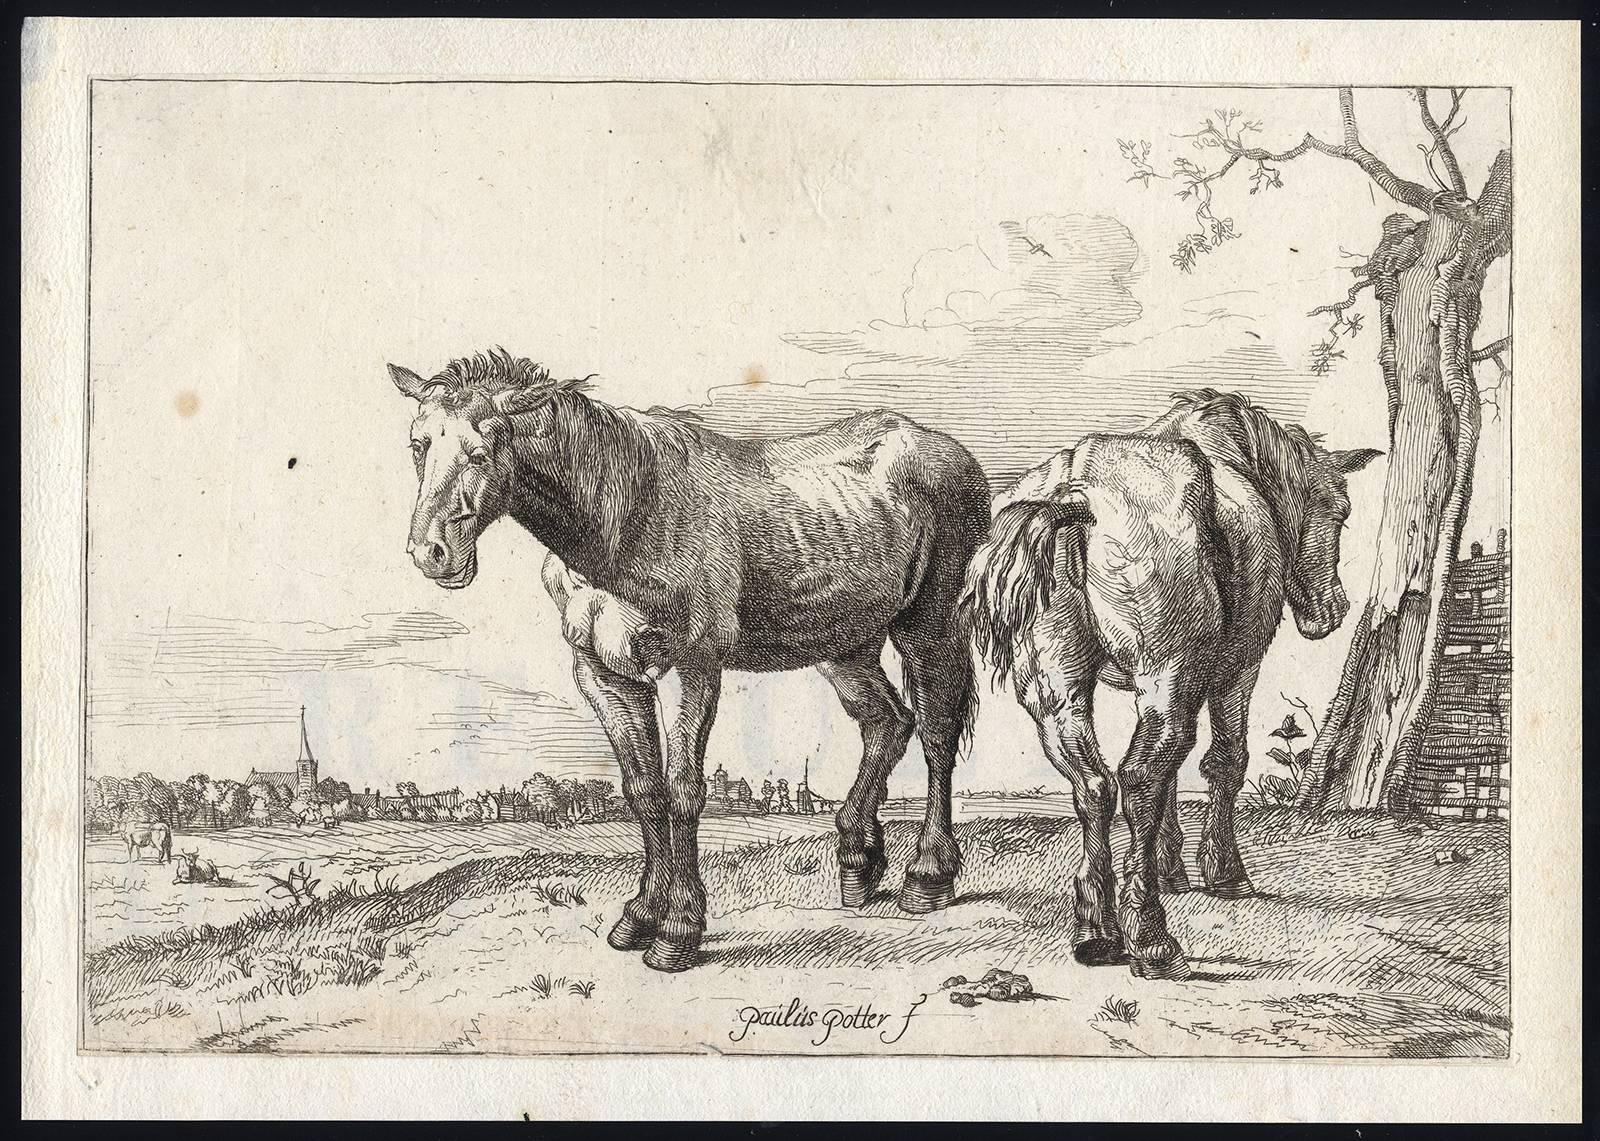 Set of 5 antique prints, untitled. All show horses in a landscape (including the Frisian horse). One the backgrounds shows the castle of Heemstede. The complete series of horses, copies in reverse. 
17th. Century etchings on hand laid paper with